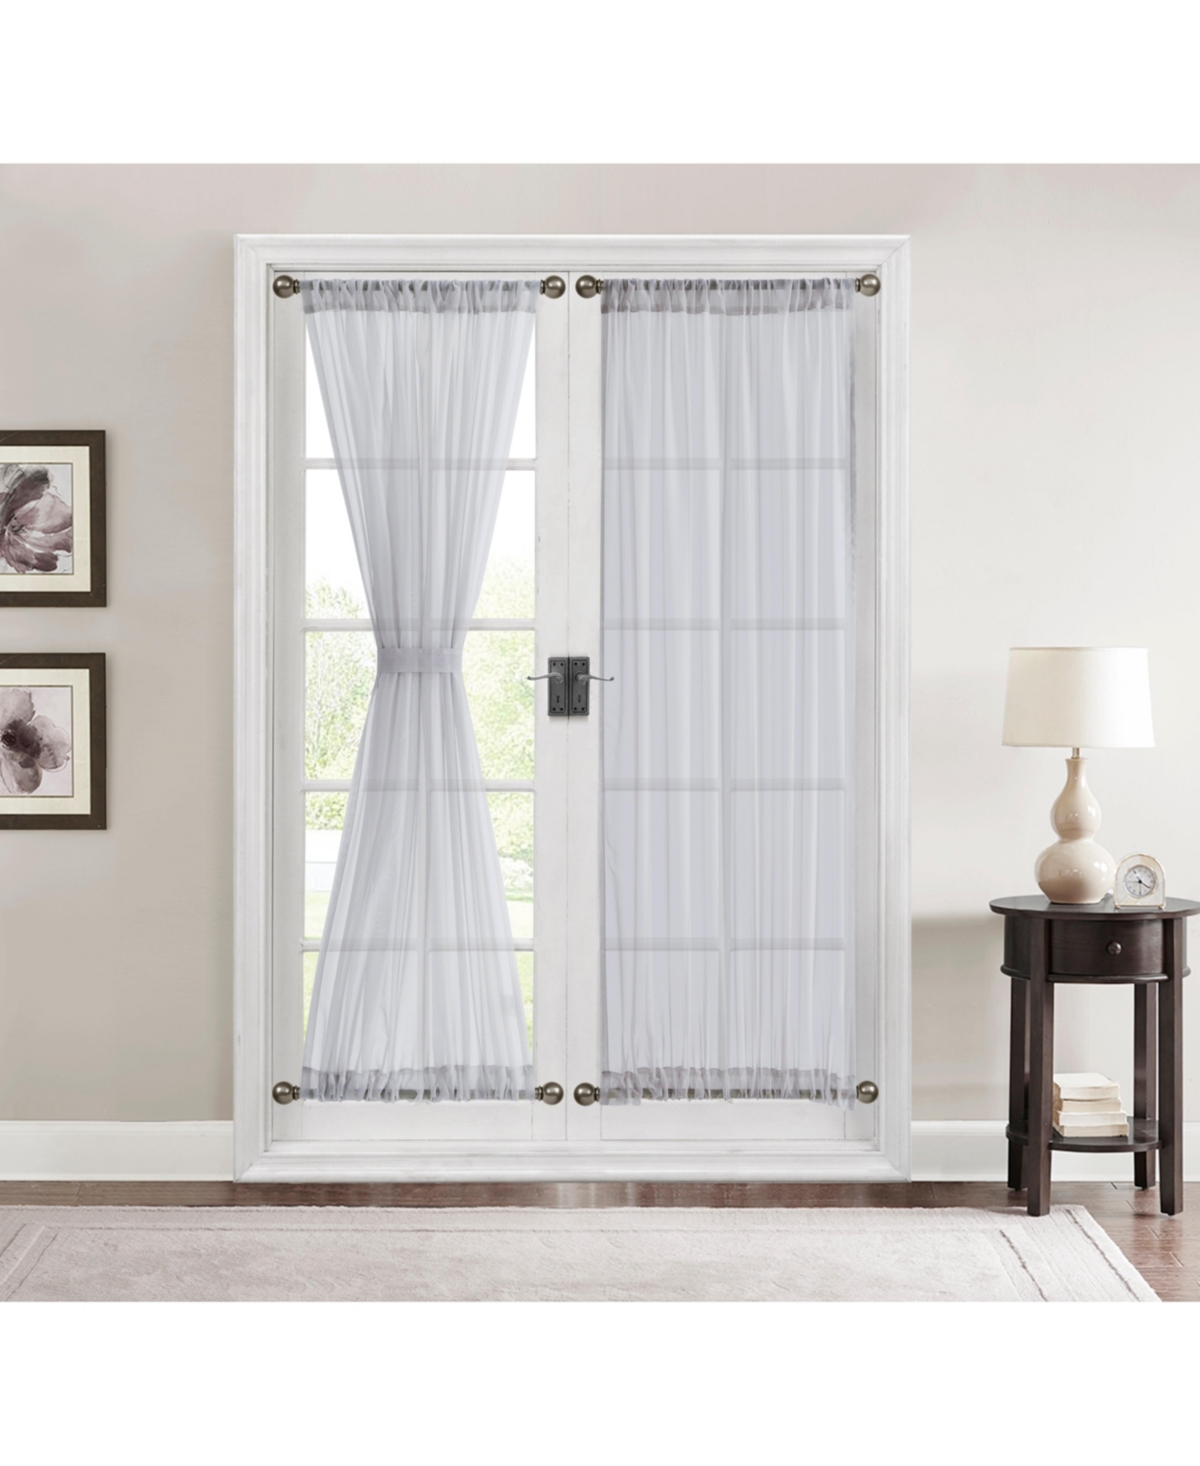 Sheer Voile French Door Patio Sidelight Window Treatment Curtain Panels with Tieback for Kitchen - 2 Panels (Silver, 54 W x 72 L) - Silver